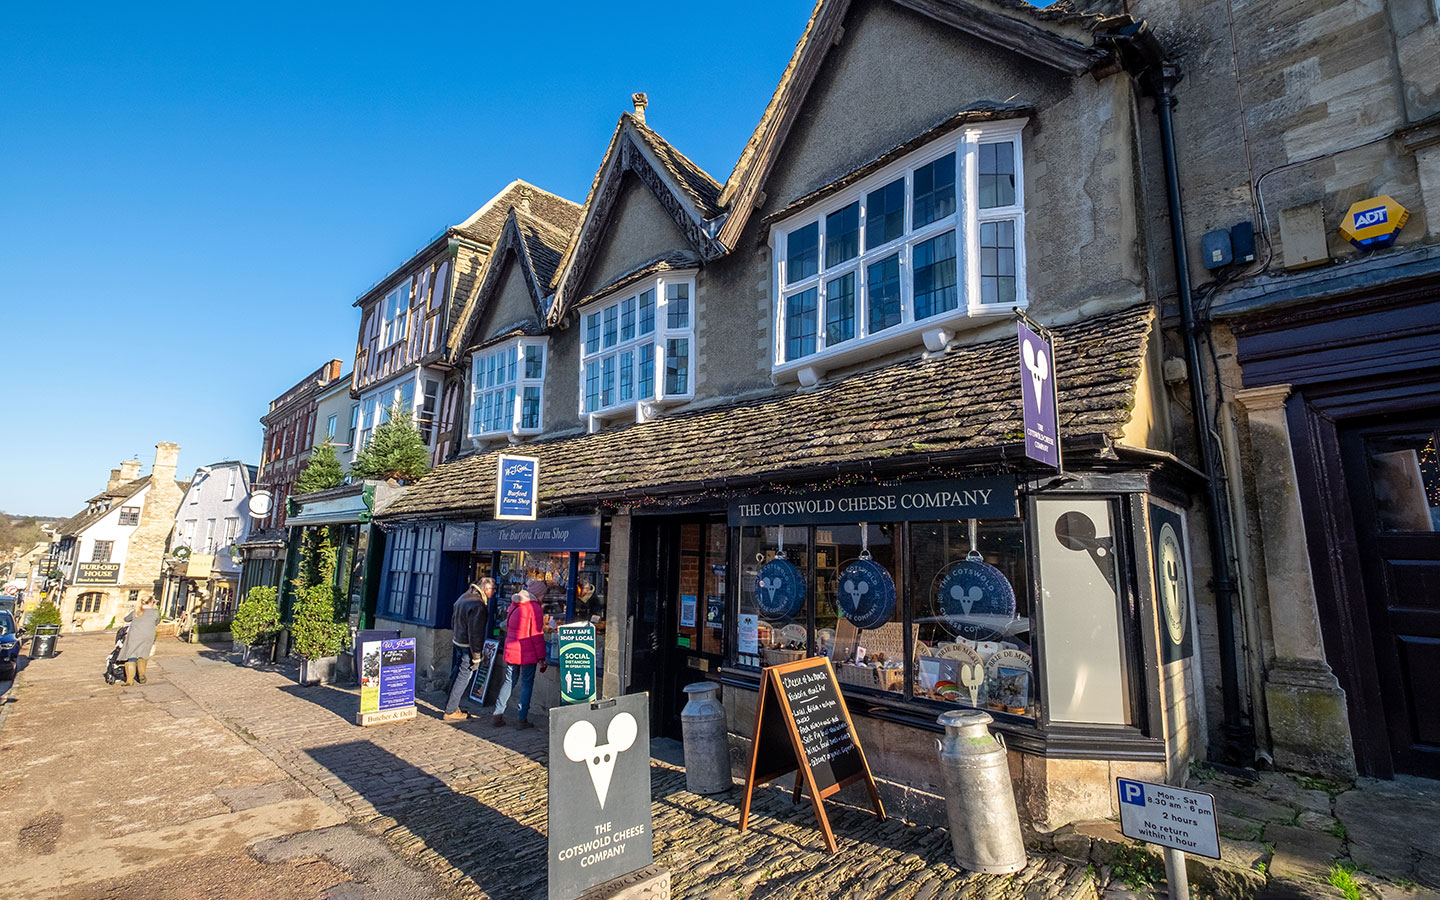 The Cotswold Cheese Company shop in Burford